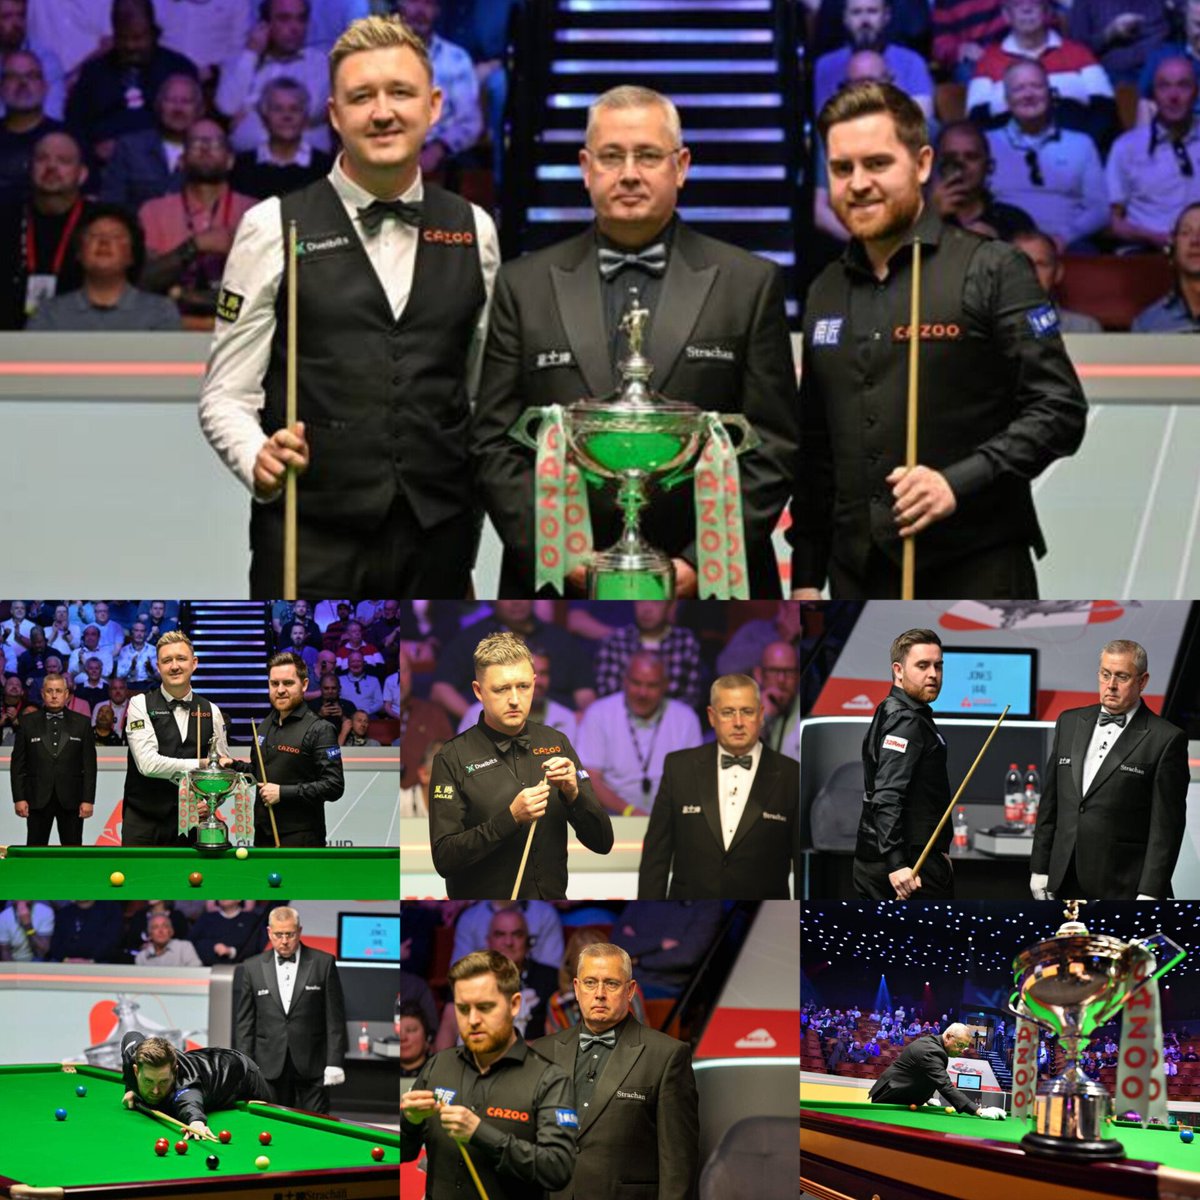 Paul Collier's last World Championship Final!
We'll miss you @welshref 👋
All the best!
#snooker #WorldChampionship
📸 Imago-images